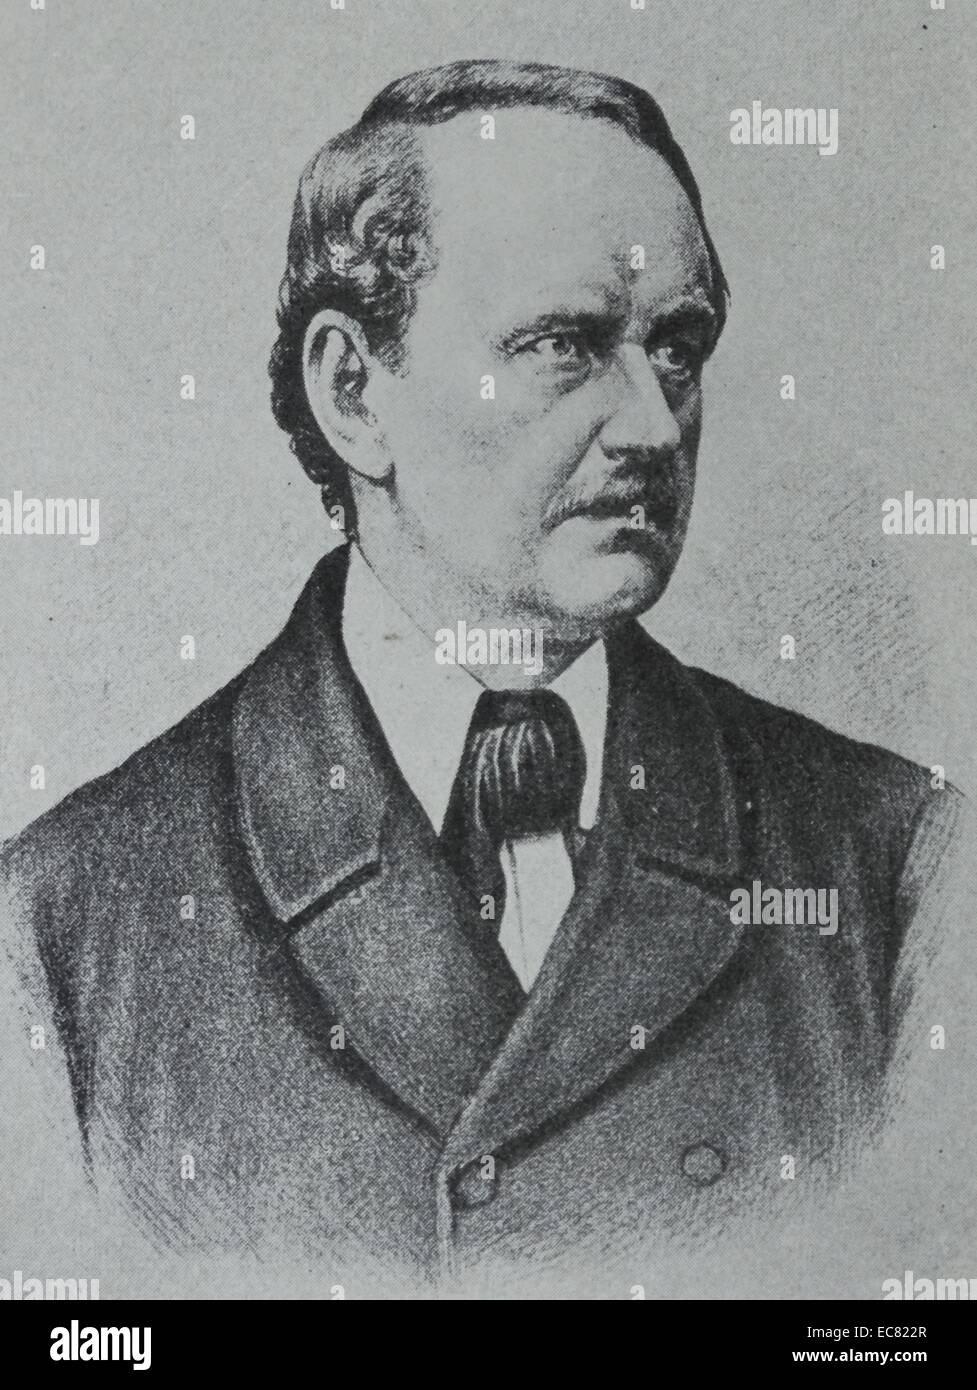 Matthias Jakob Schleiden (5 April 1804 – 23 June 1881) was a German botanist. He was best known for being a co-founder of the cell theory. Stock Photo